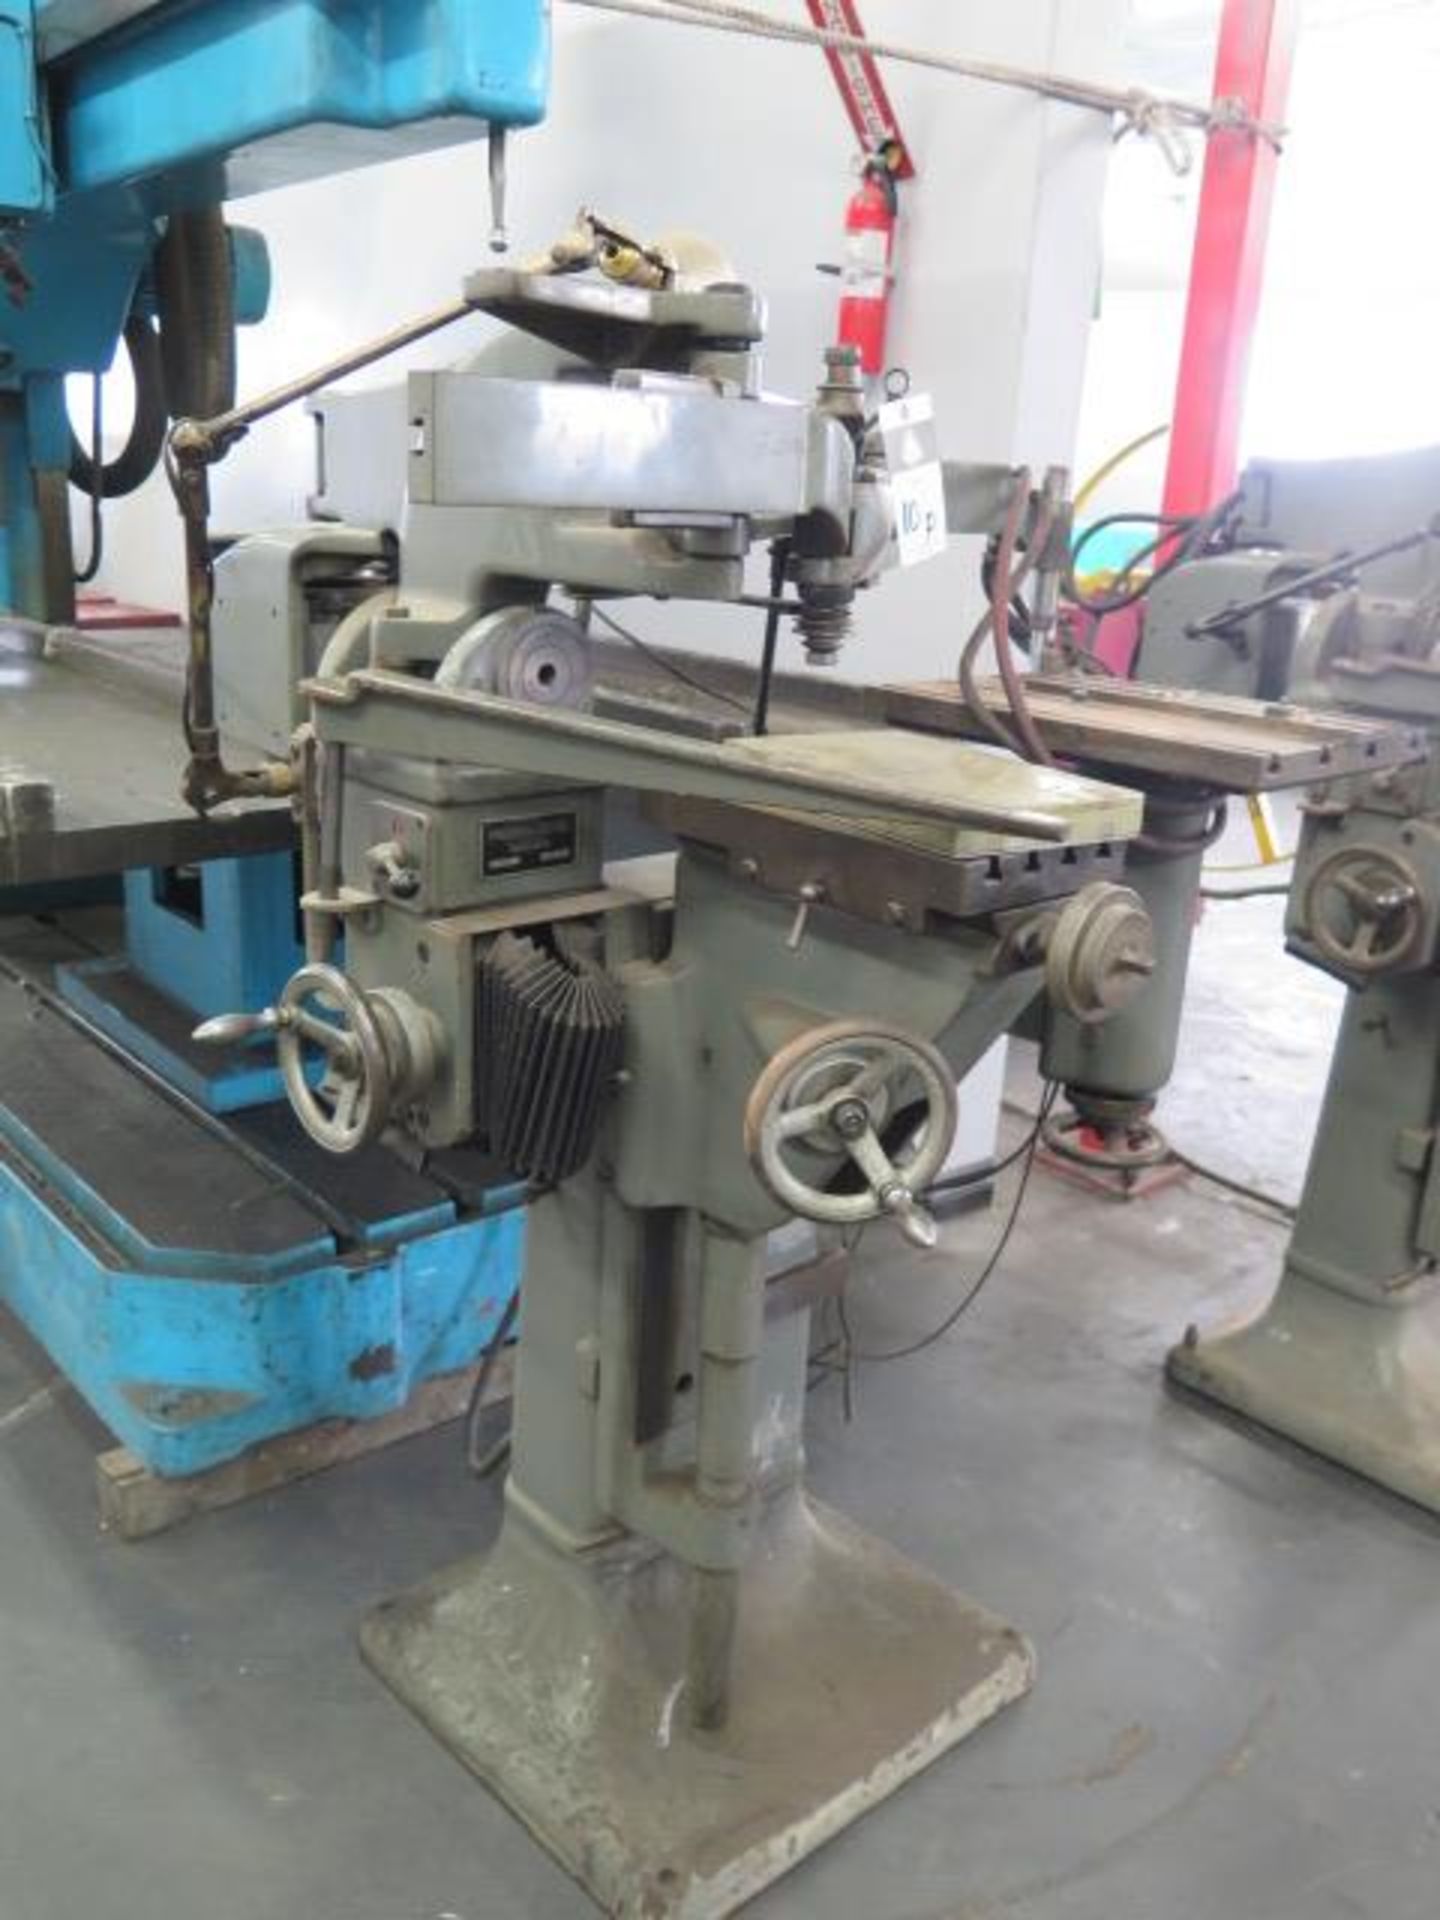 Deckel mdl. GK 21 Pantograph Machine s/n 4600-4975 w/ 475-20,000 RPM (SOLD AS-IS - NO WARRANTY) - Image 2 of 8